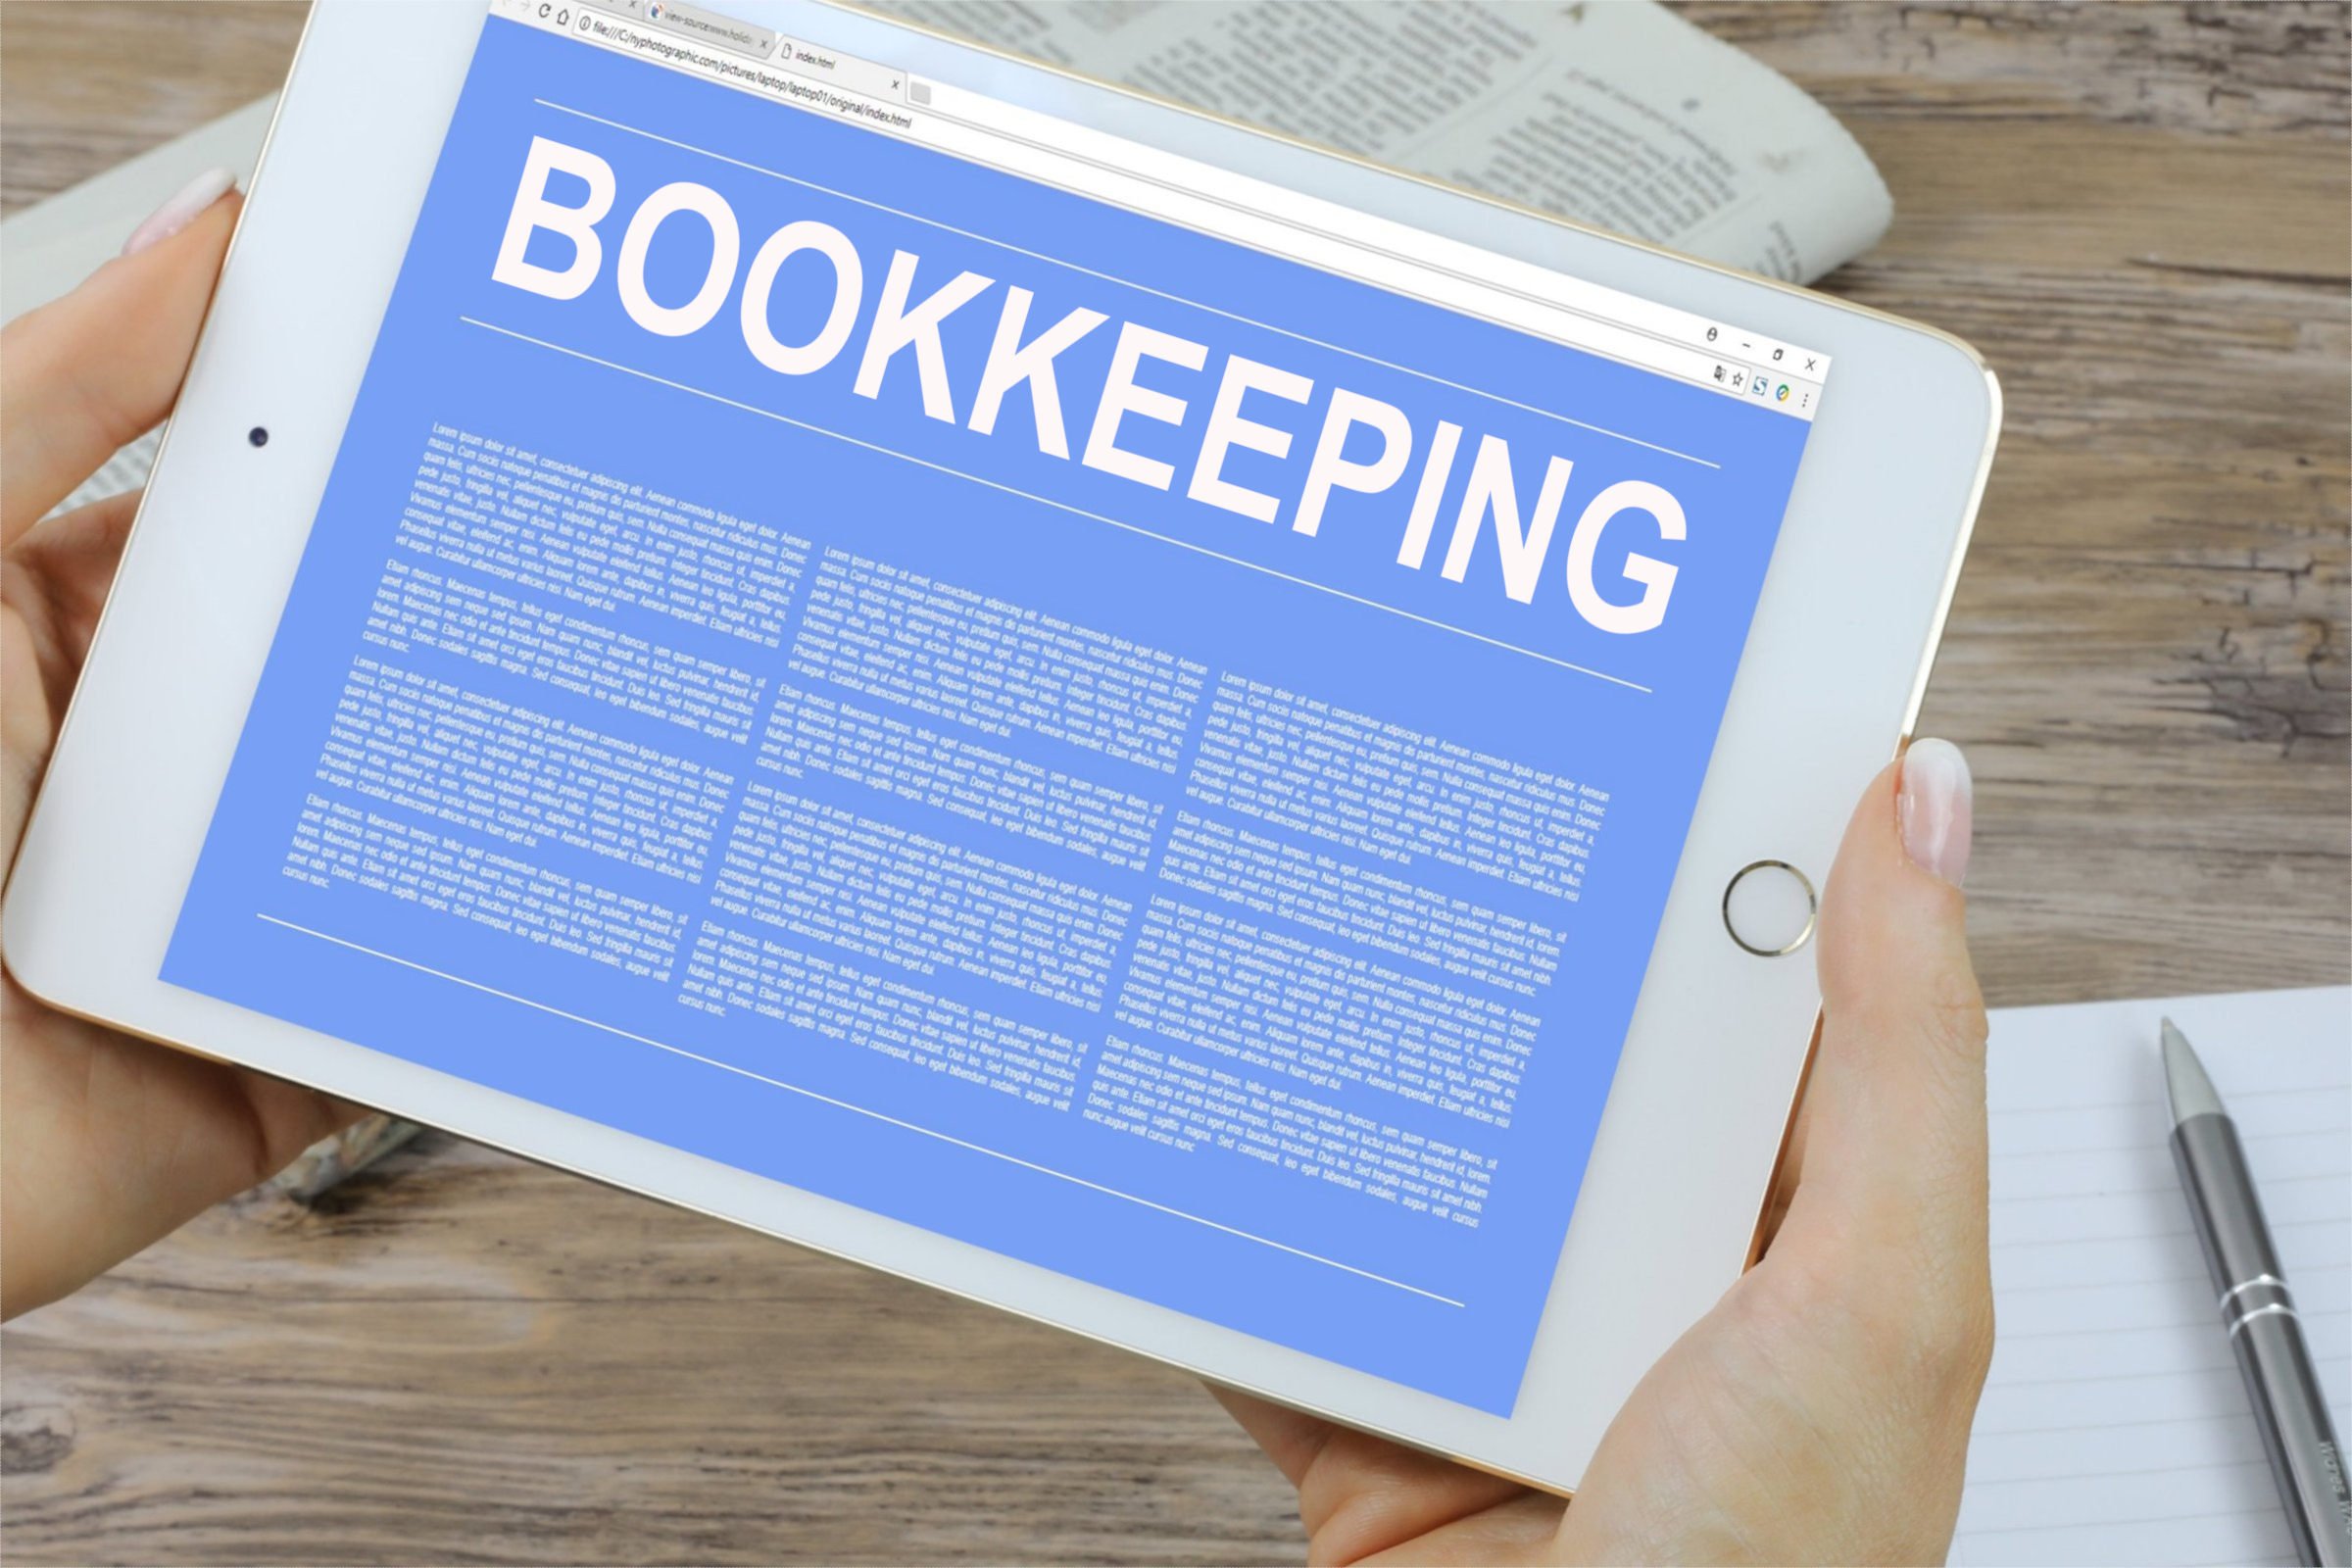 HOW TO DO BOOKKEEPING IN PAKISTAN? (ACCOUNTANT)